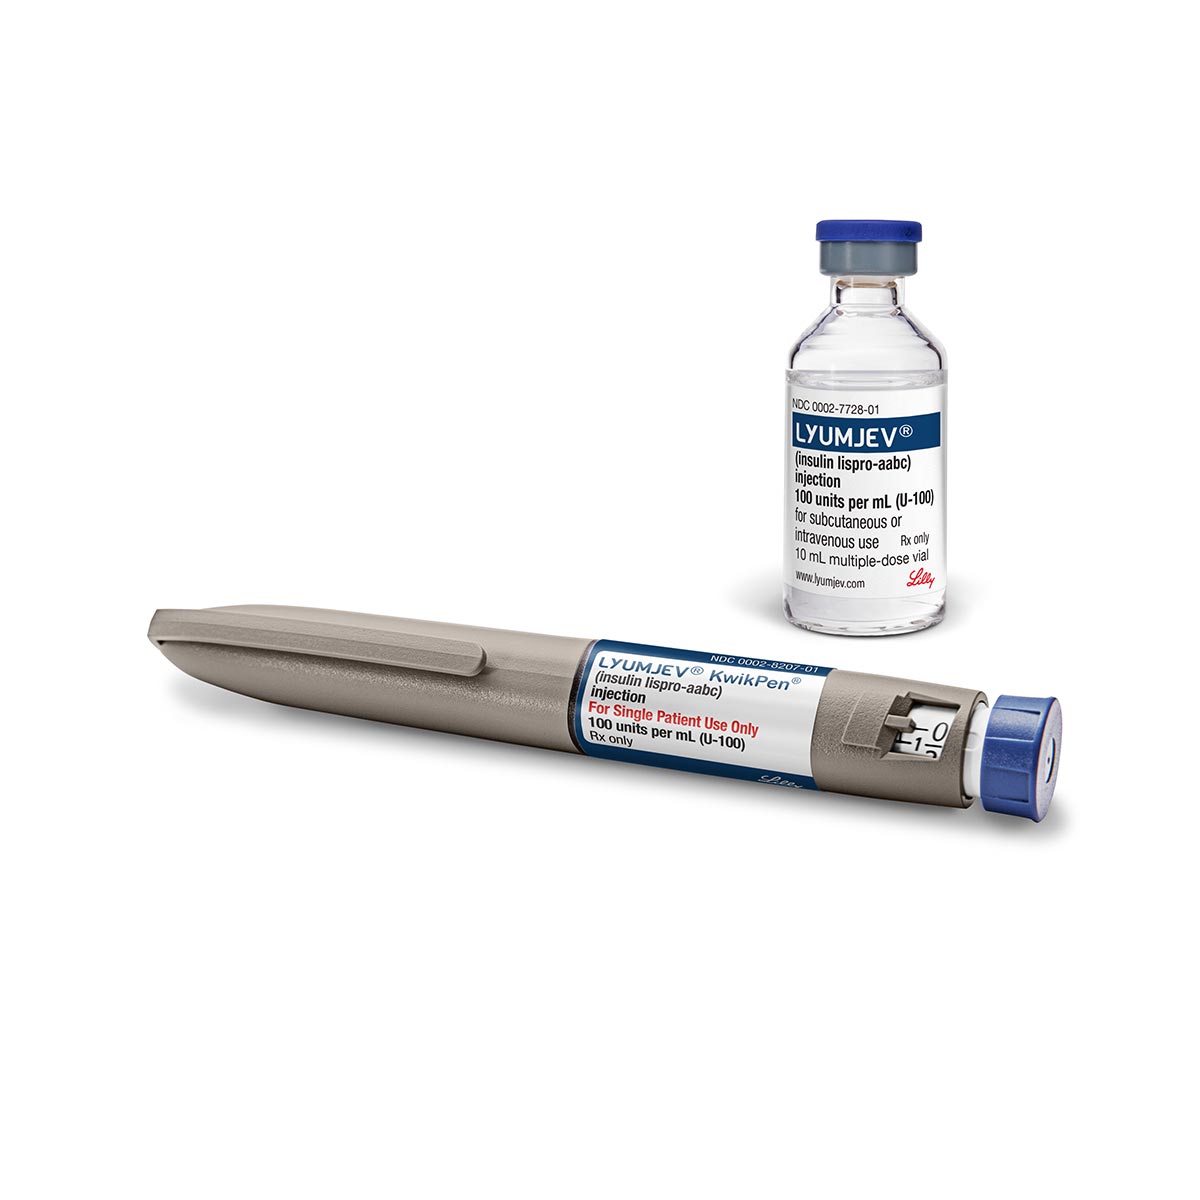 Lyumjev fast-acting insulin and KwikPen injector